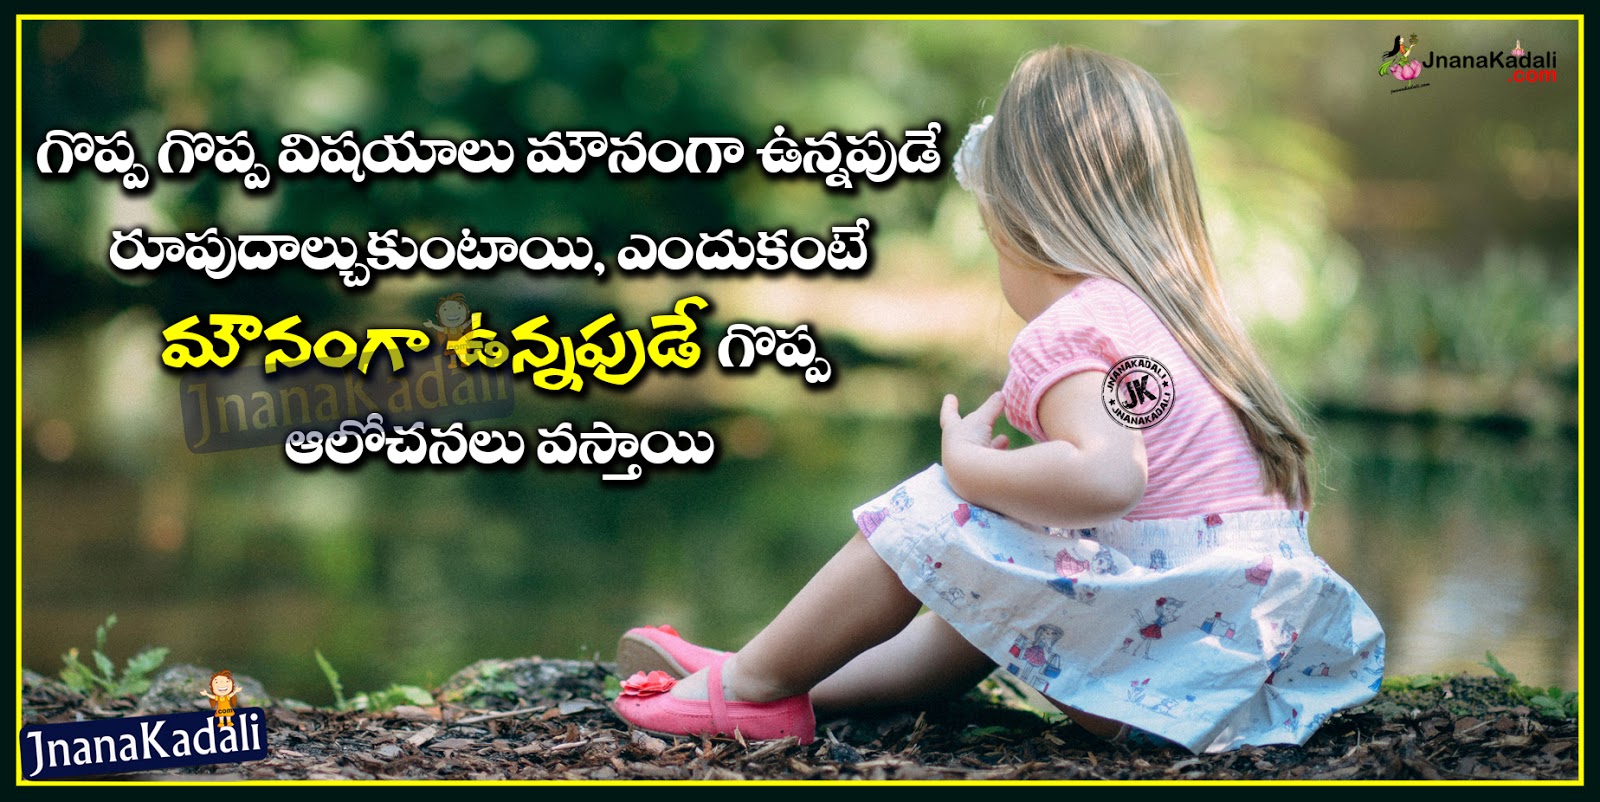 Here is a Nice Telugu Life Lessons Quotations in Telugu Telugu No Money in Pocket